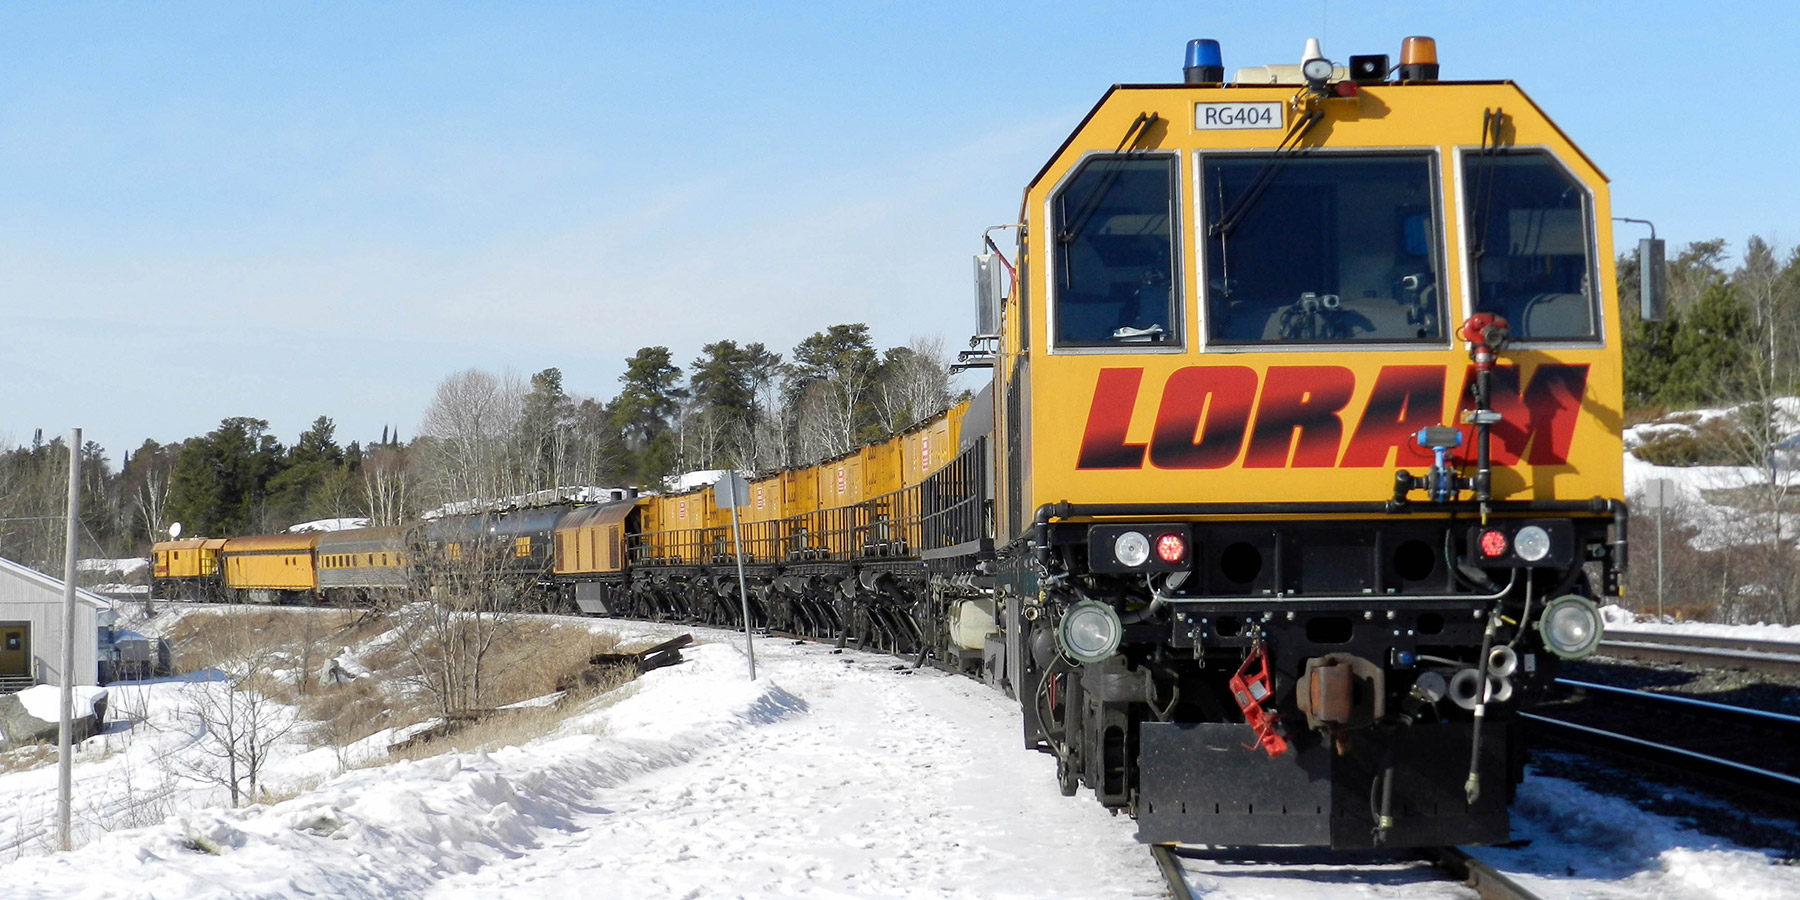 Yellow loram rail grinding train on snow-covered tracks on a clear day.